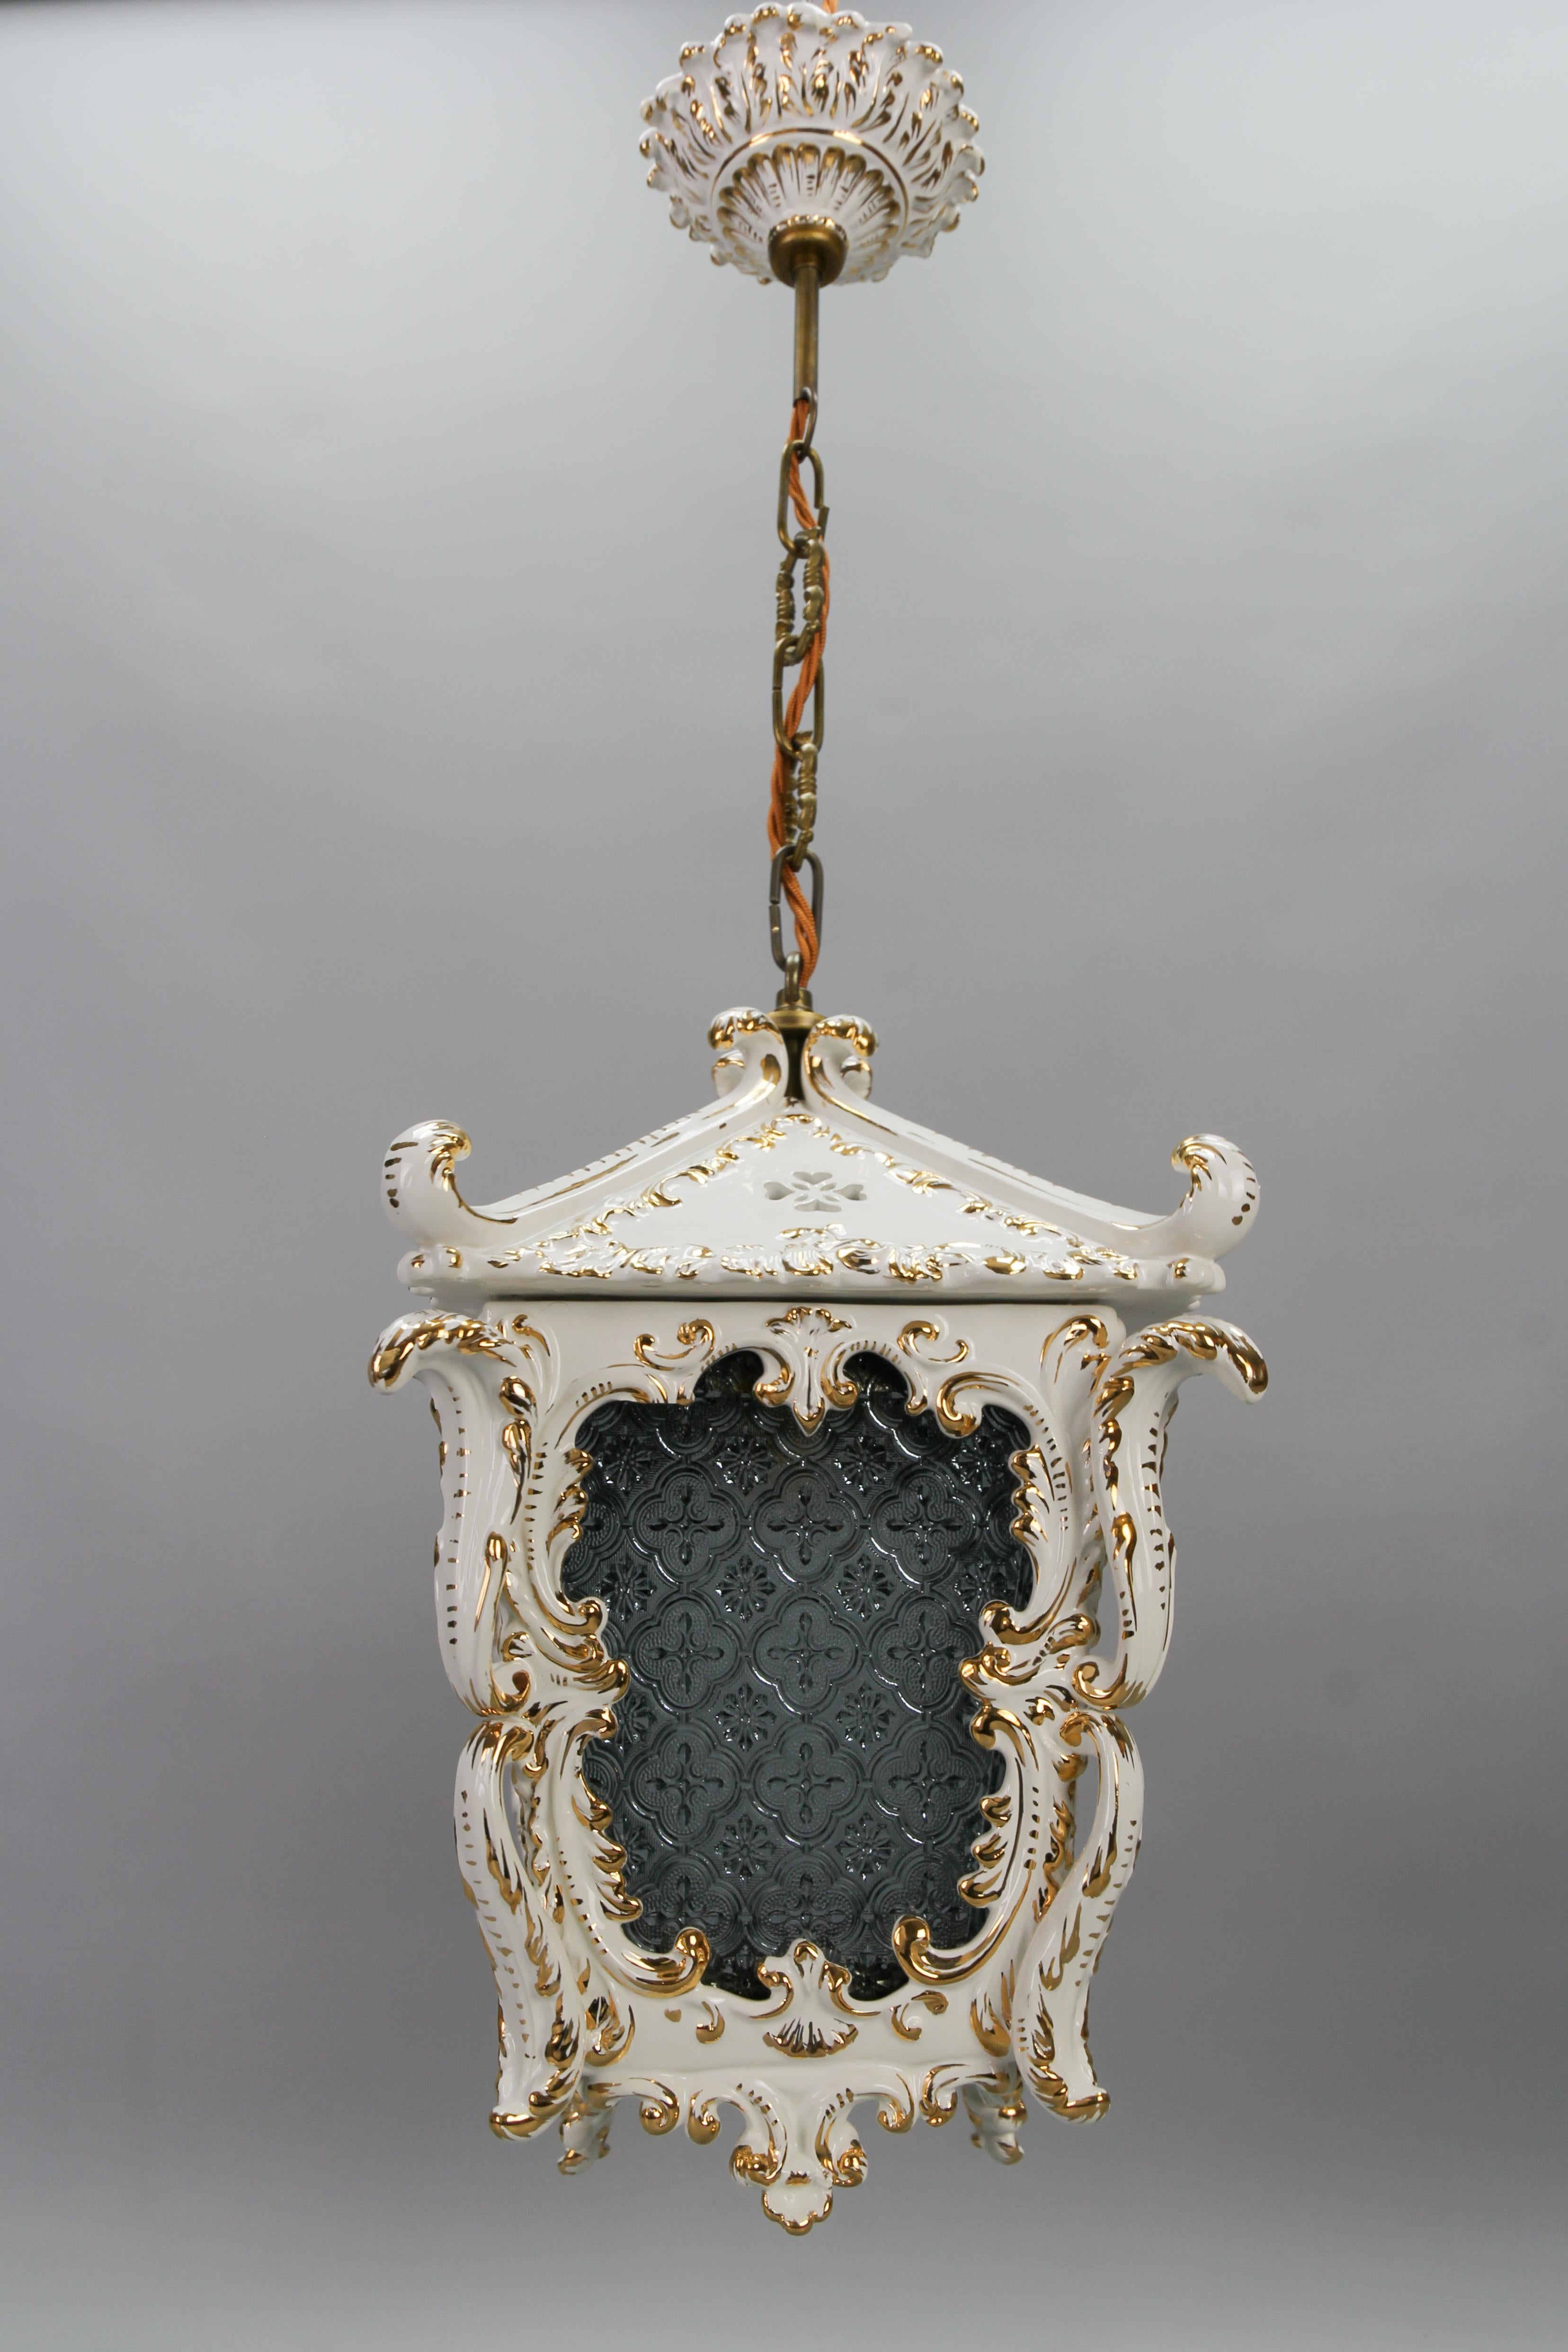 Vintage French Rococo Style White Ceramic and Glass Hanging Lantern, 1970s For Sale 2